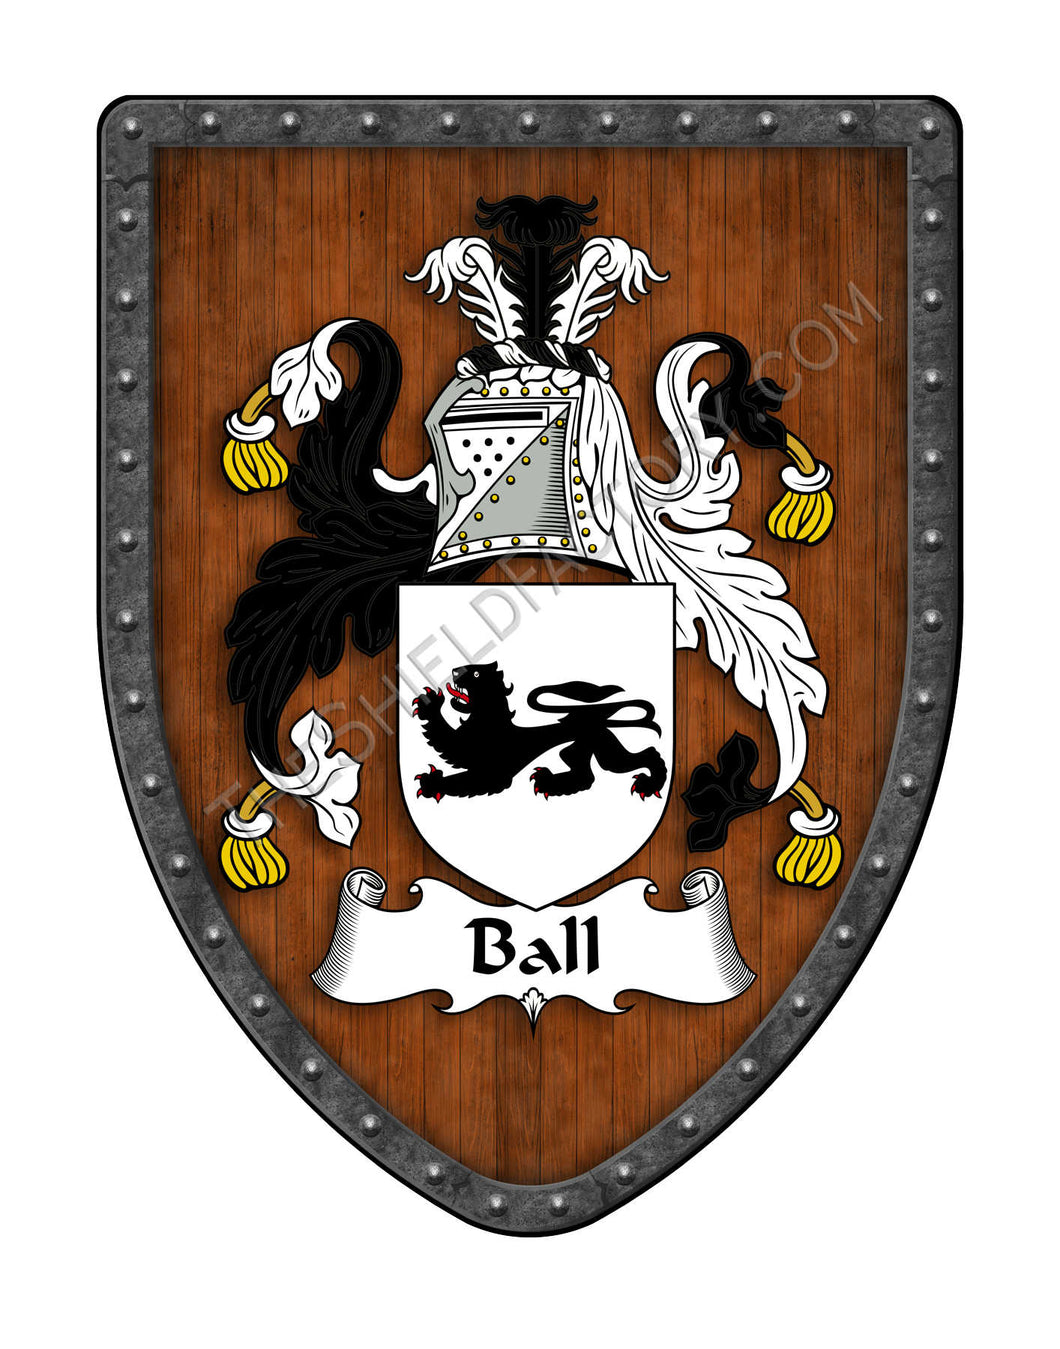 Ball Family Coat of Arms Crest